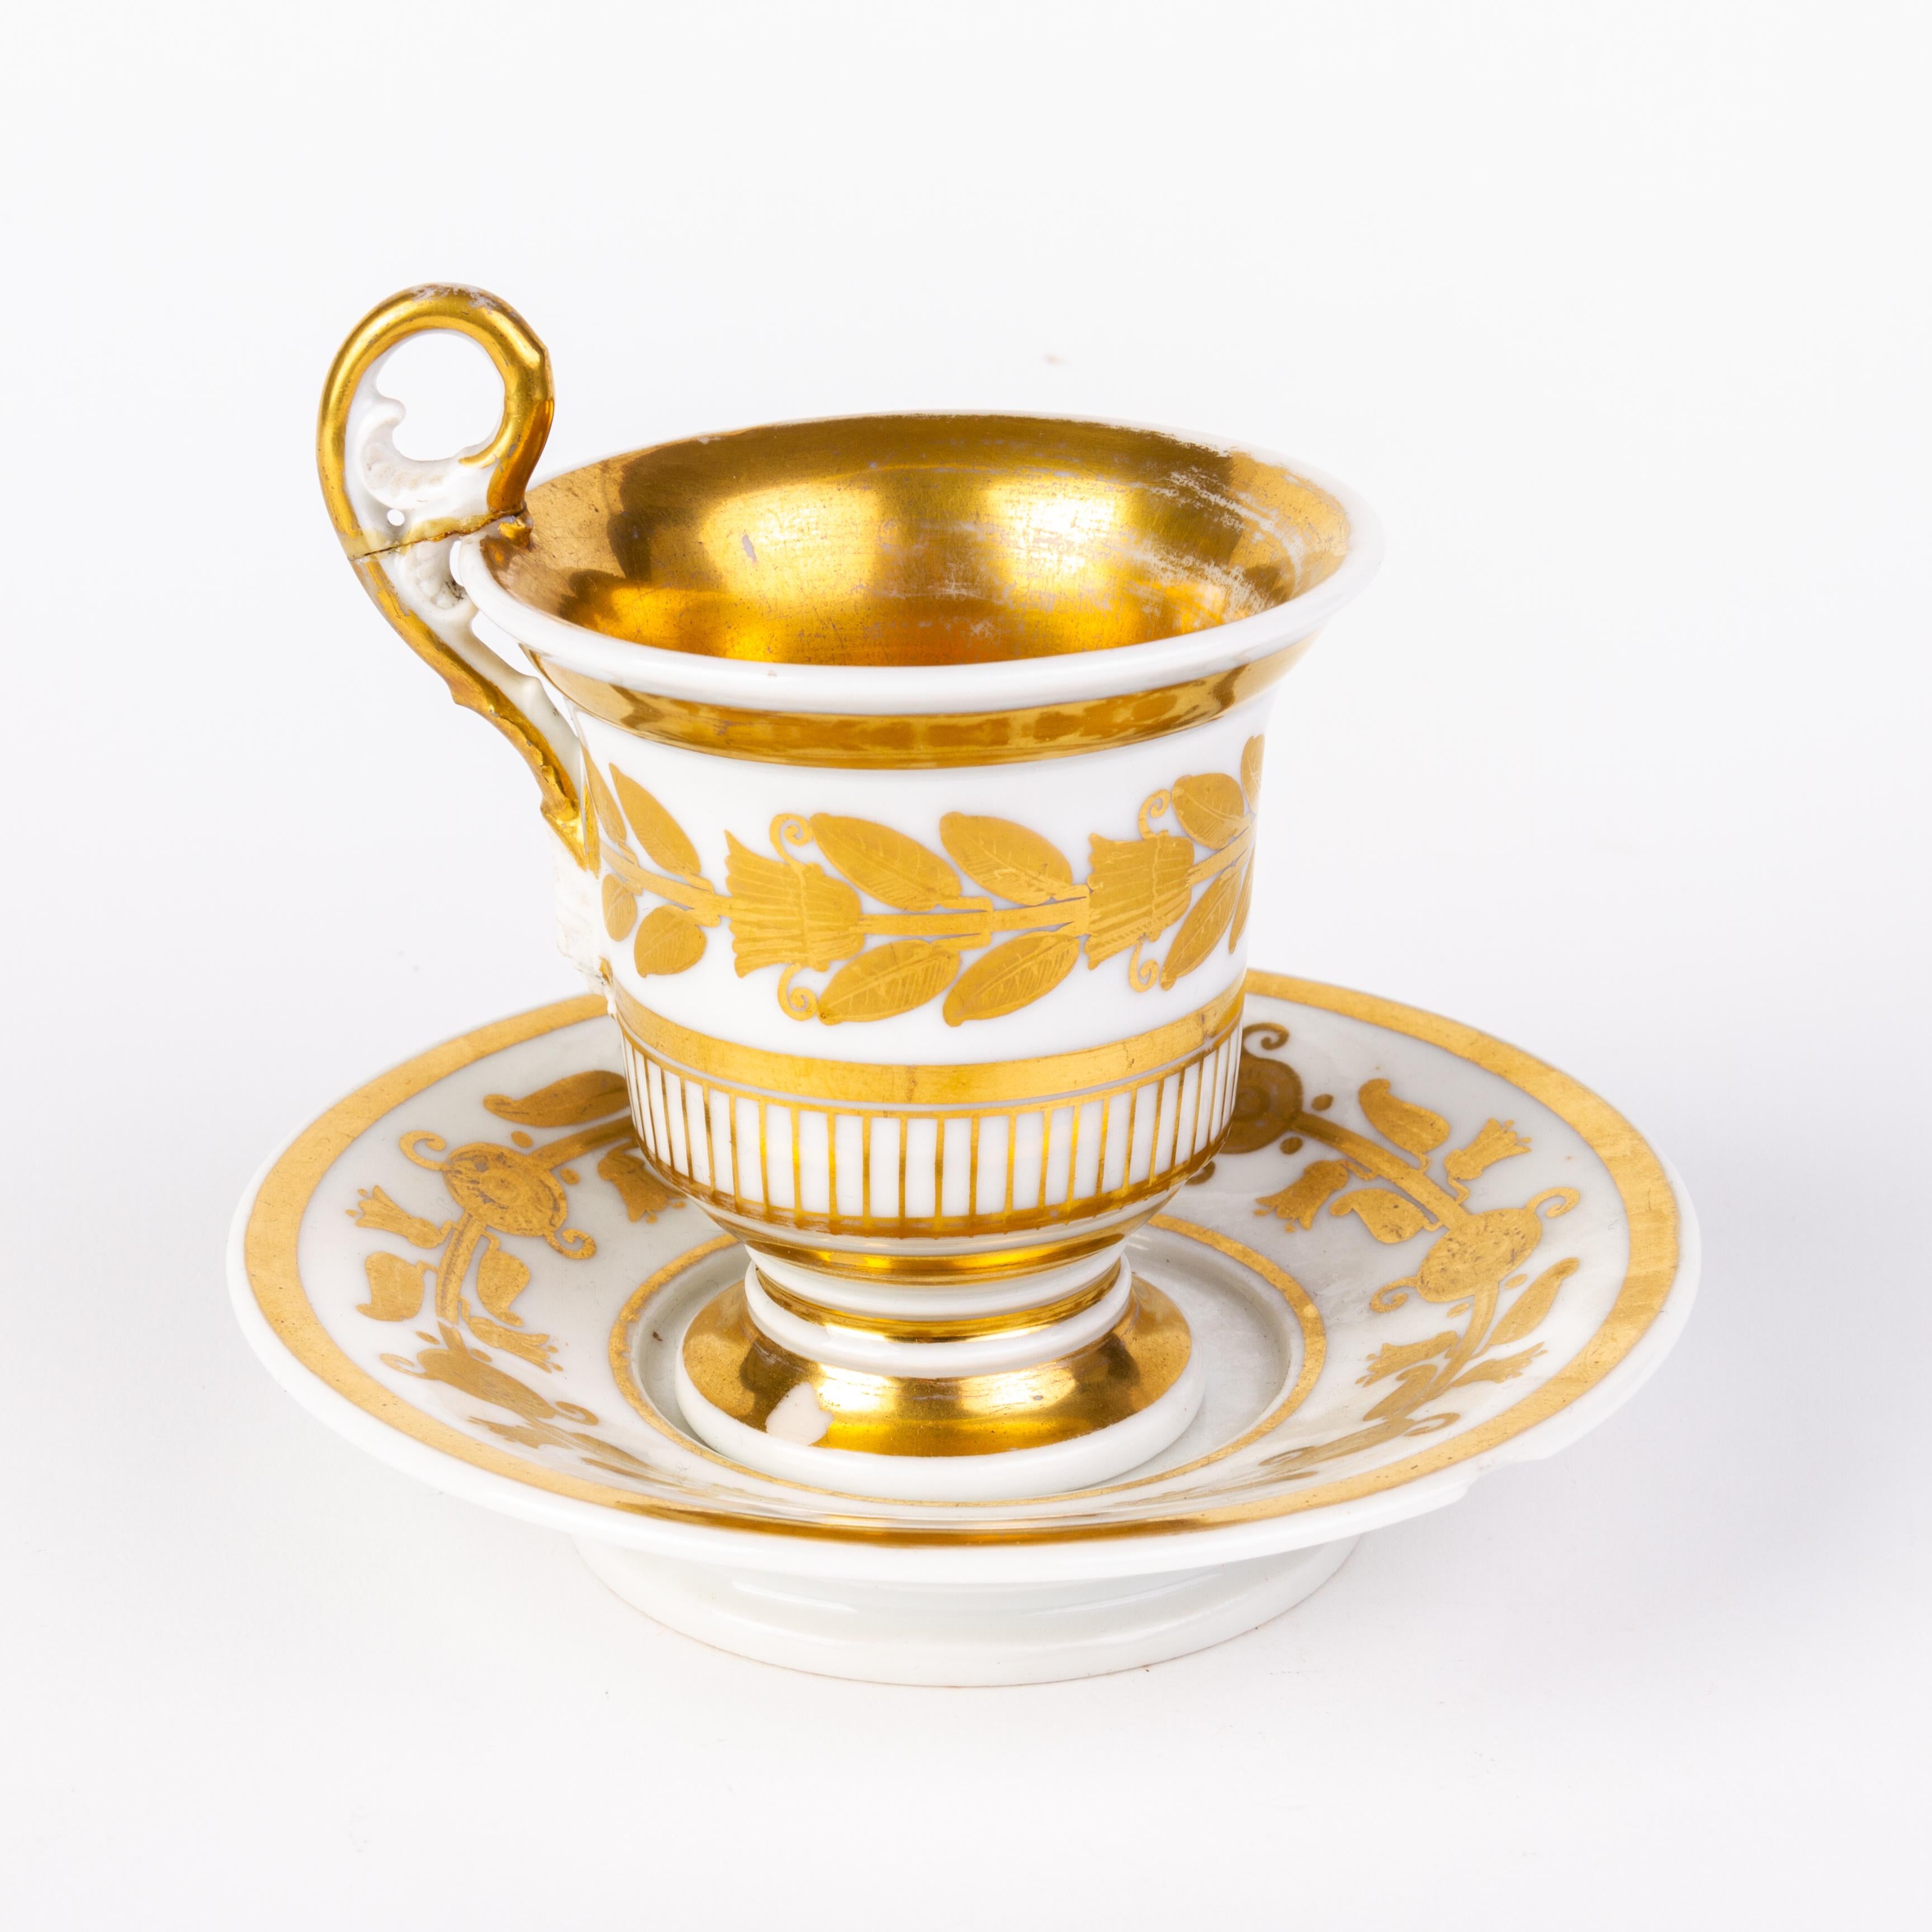 Paris French Gilt Porcelain Empire Teacup & Saucer ca. 1790 18th Century
Good condition overall, with restoration to cup's handle
From a private collection.
Free international shipping.